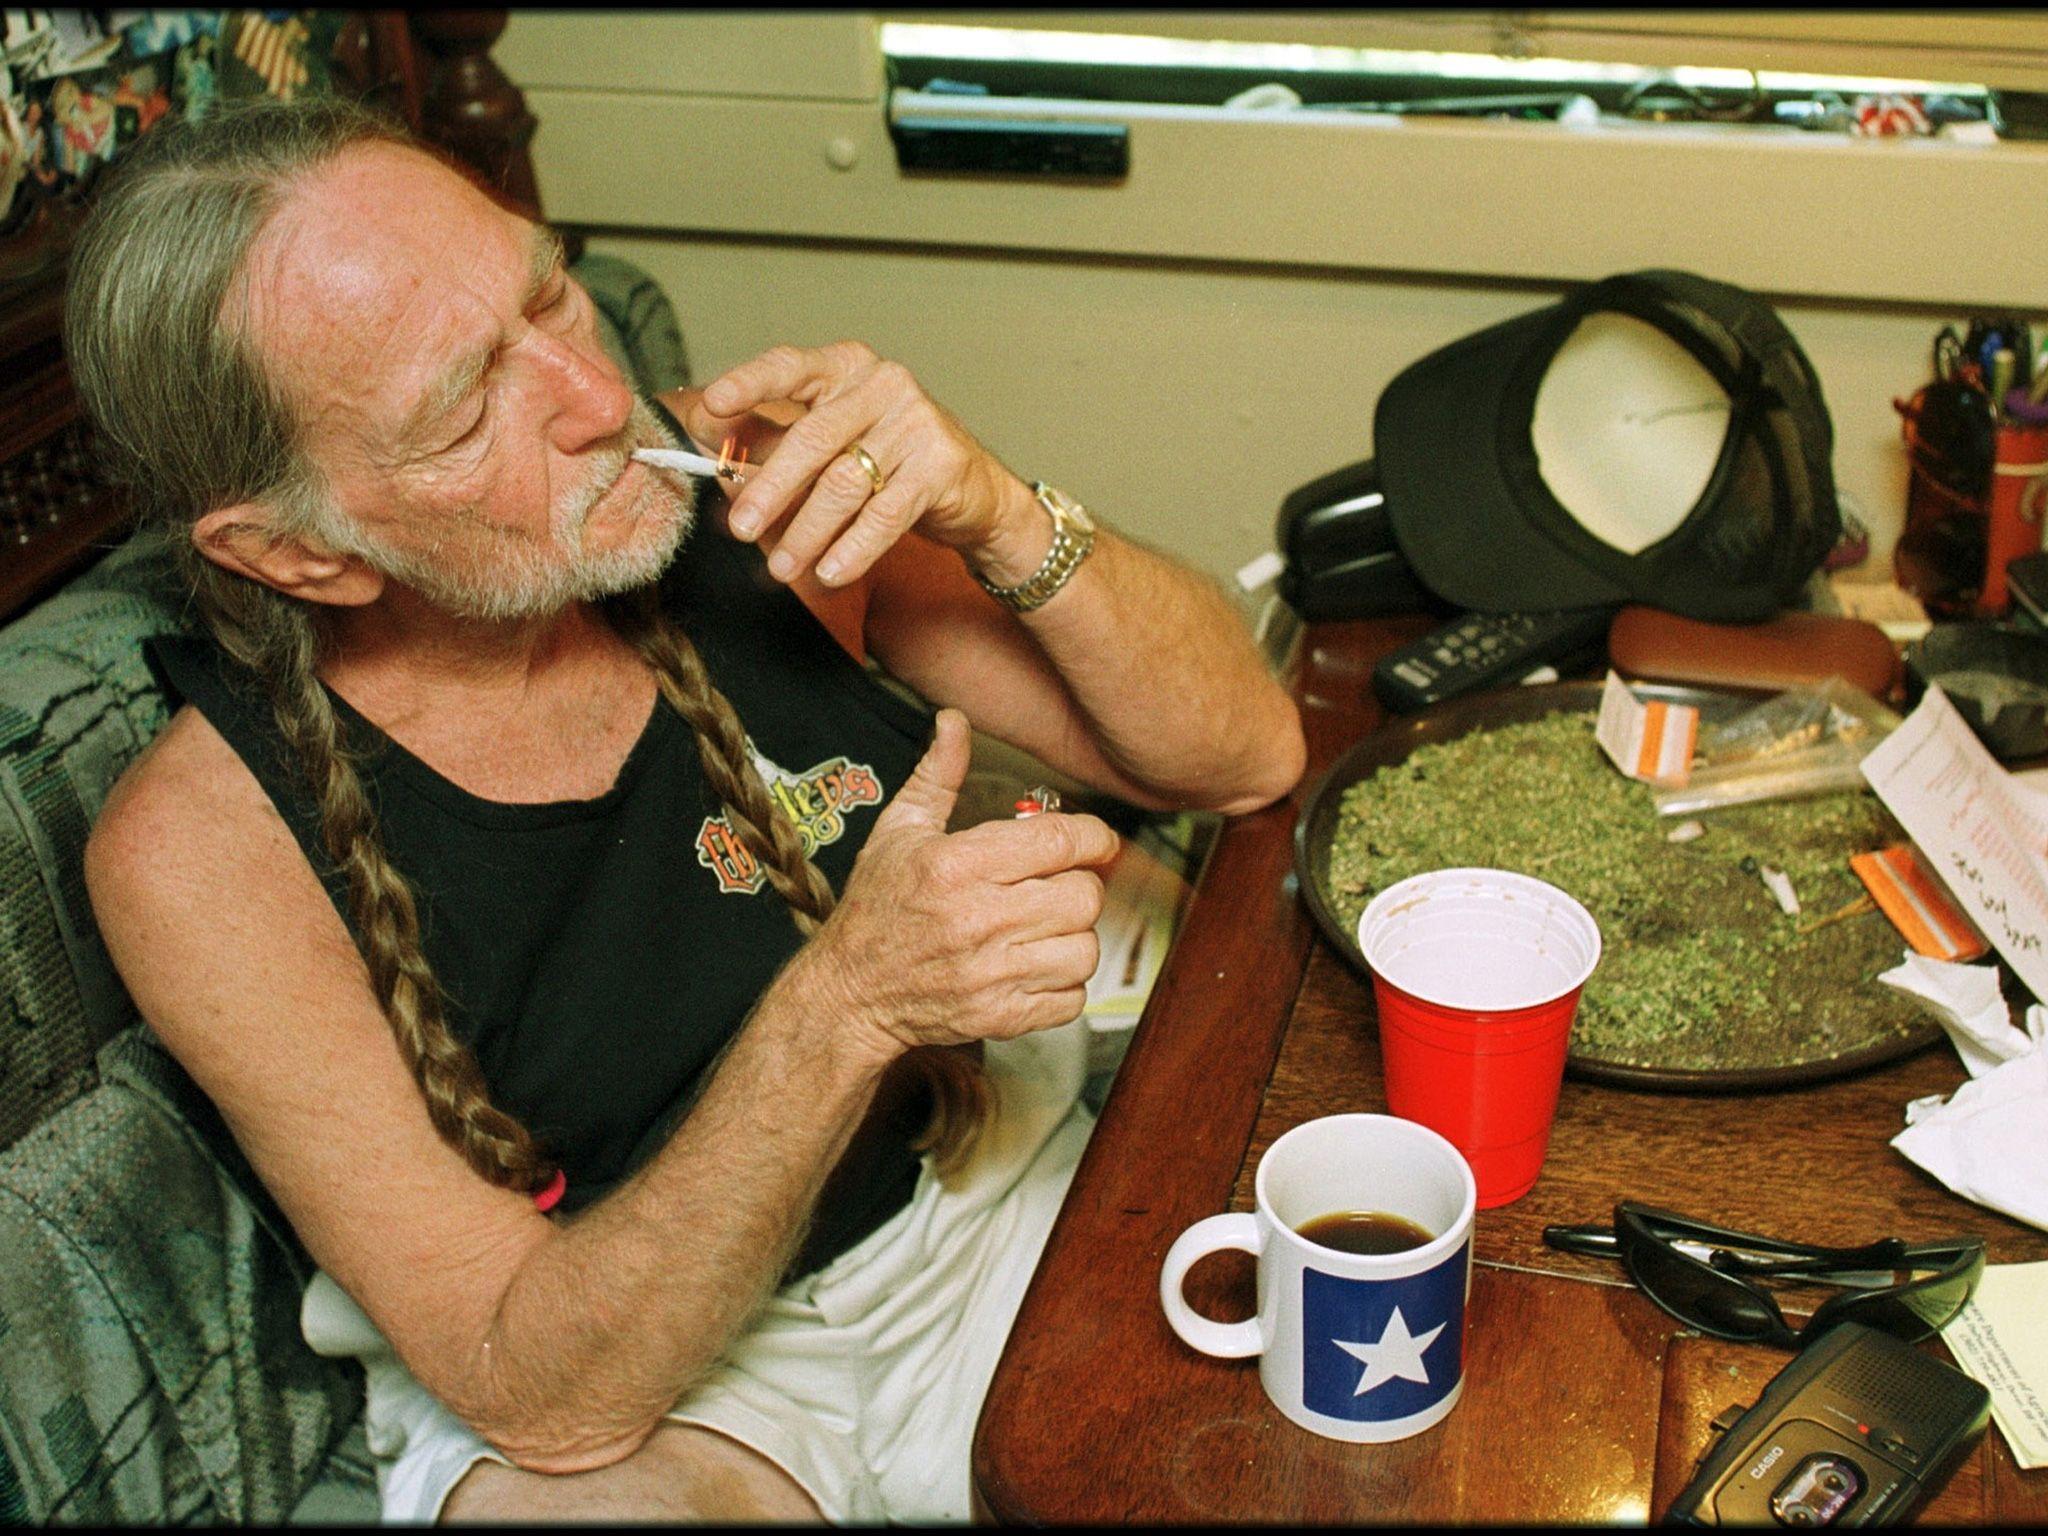 Cannabis country: Willie Nelson to sell own blend of marijuana